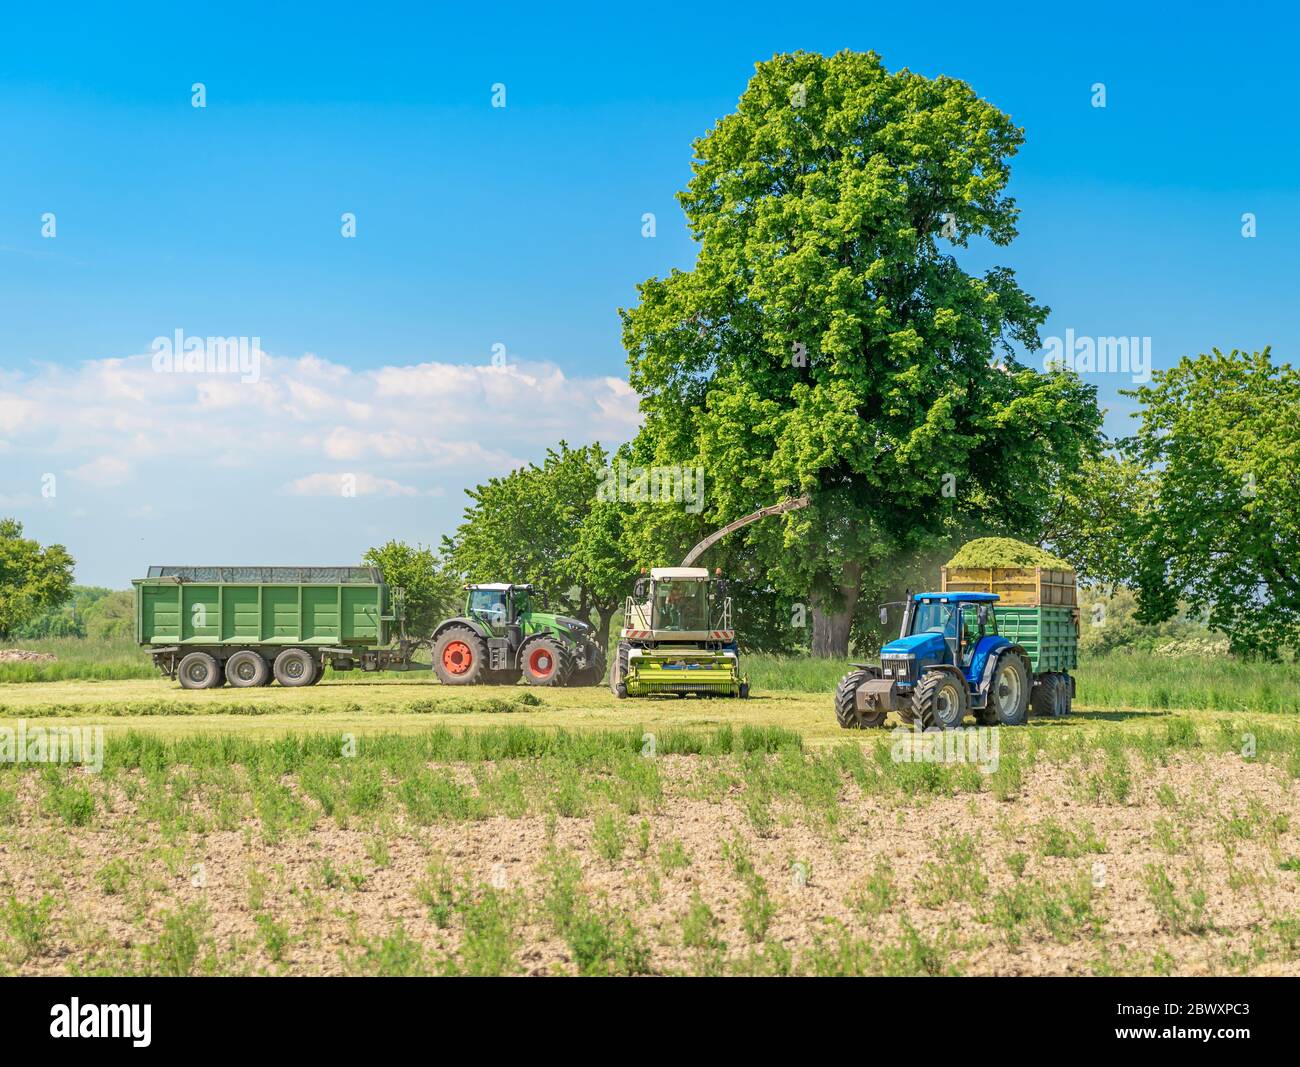 harvesting hay from the field with the help of a combine harvester and a tractor Stock Photo